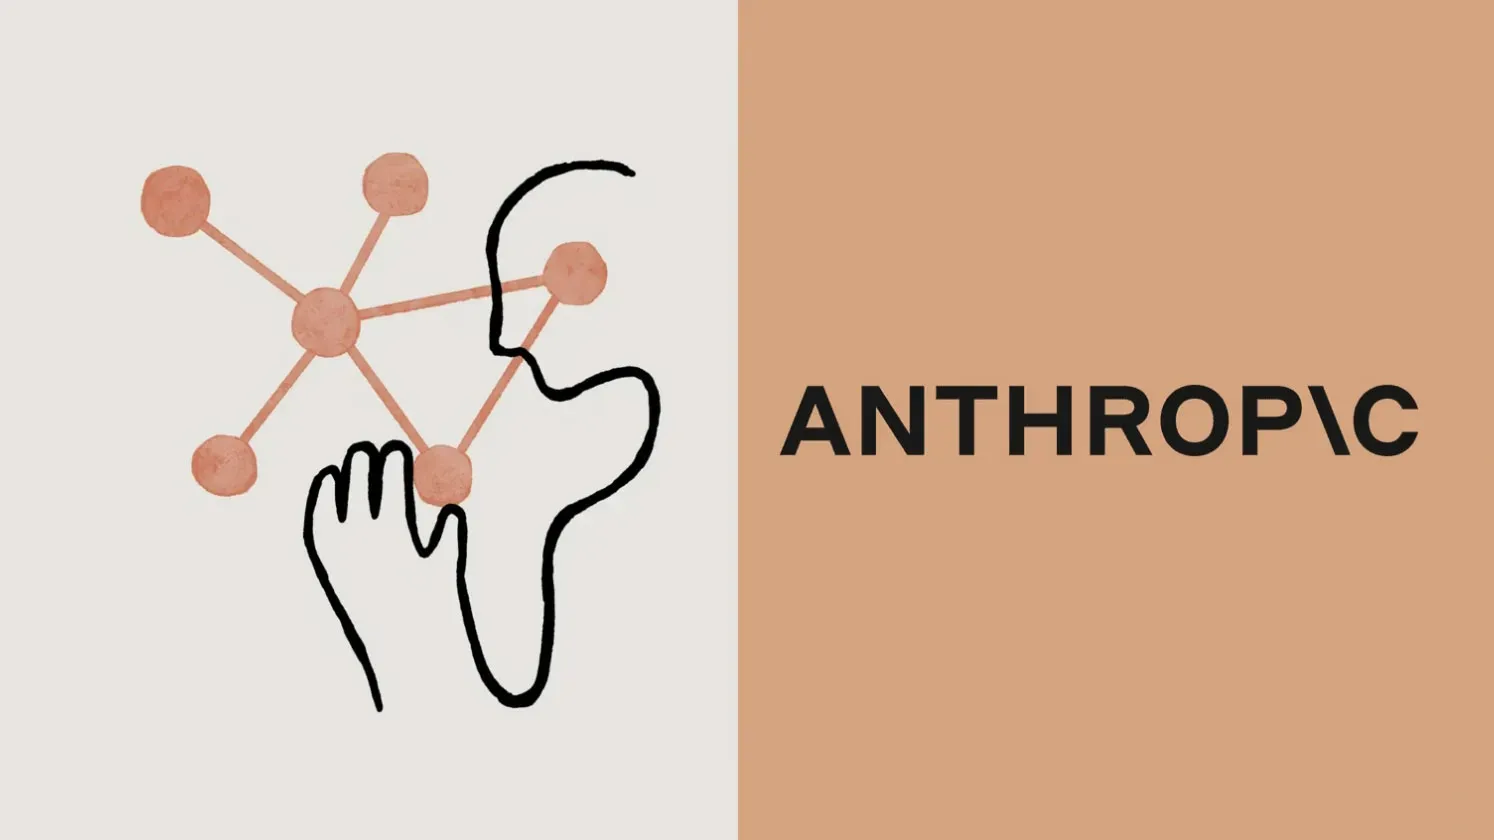 Anthropic Challenges Current AI Benchmarking Practices with New Funding Initiative